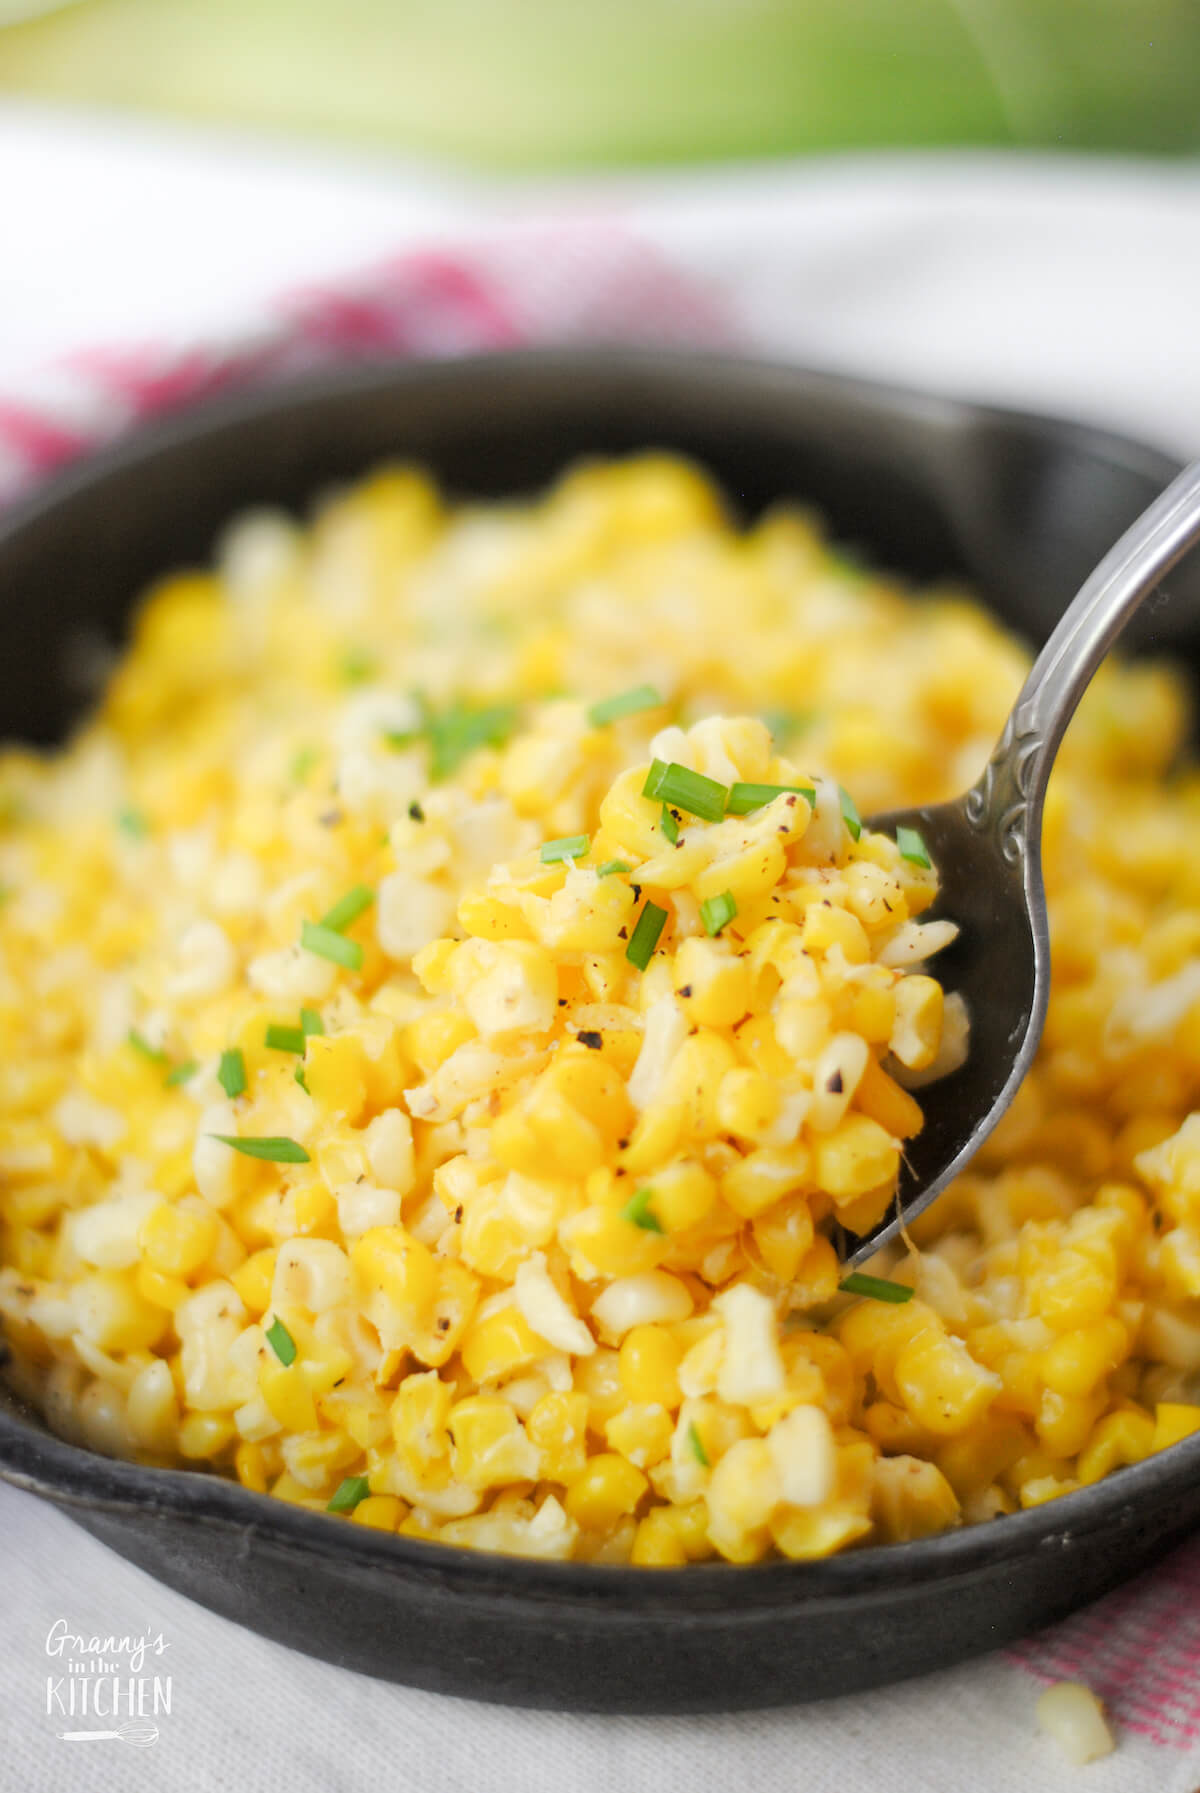 scooping up corn with a spoon, from a skillet